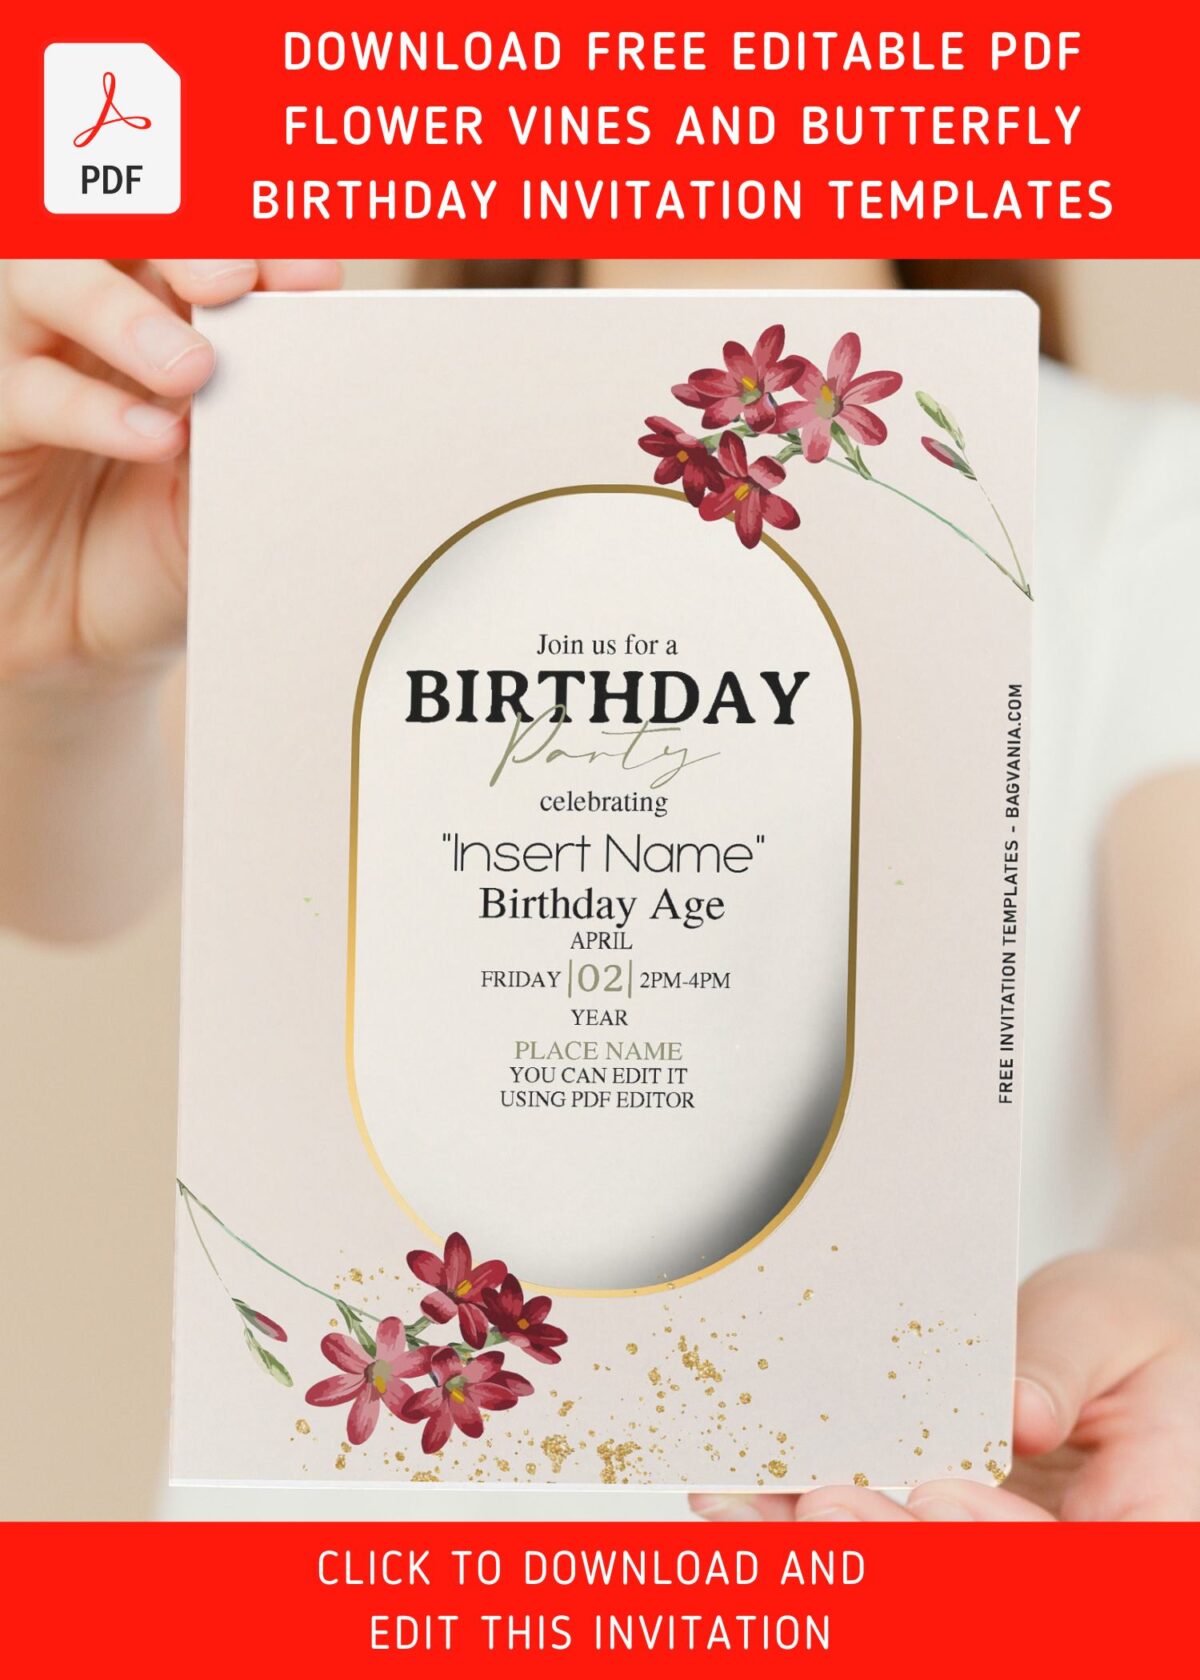 (Free Editable PDF) Butterfly Garden Birthday Invitation Templates with beige background